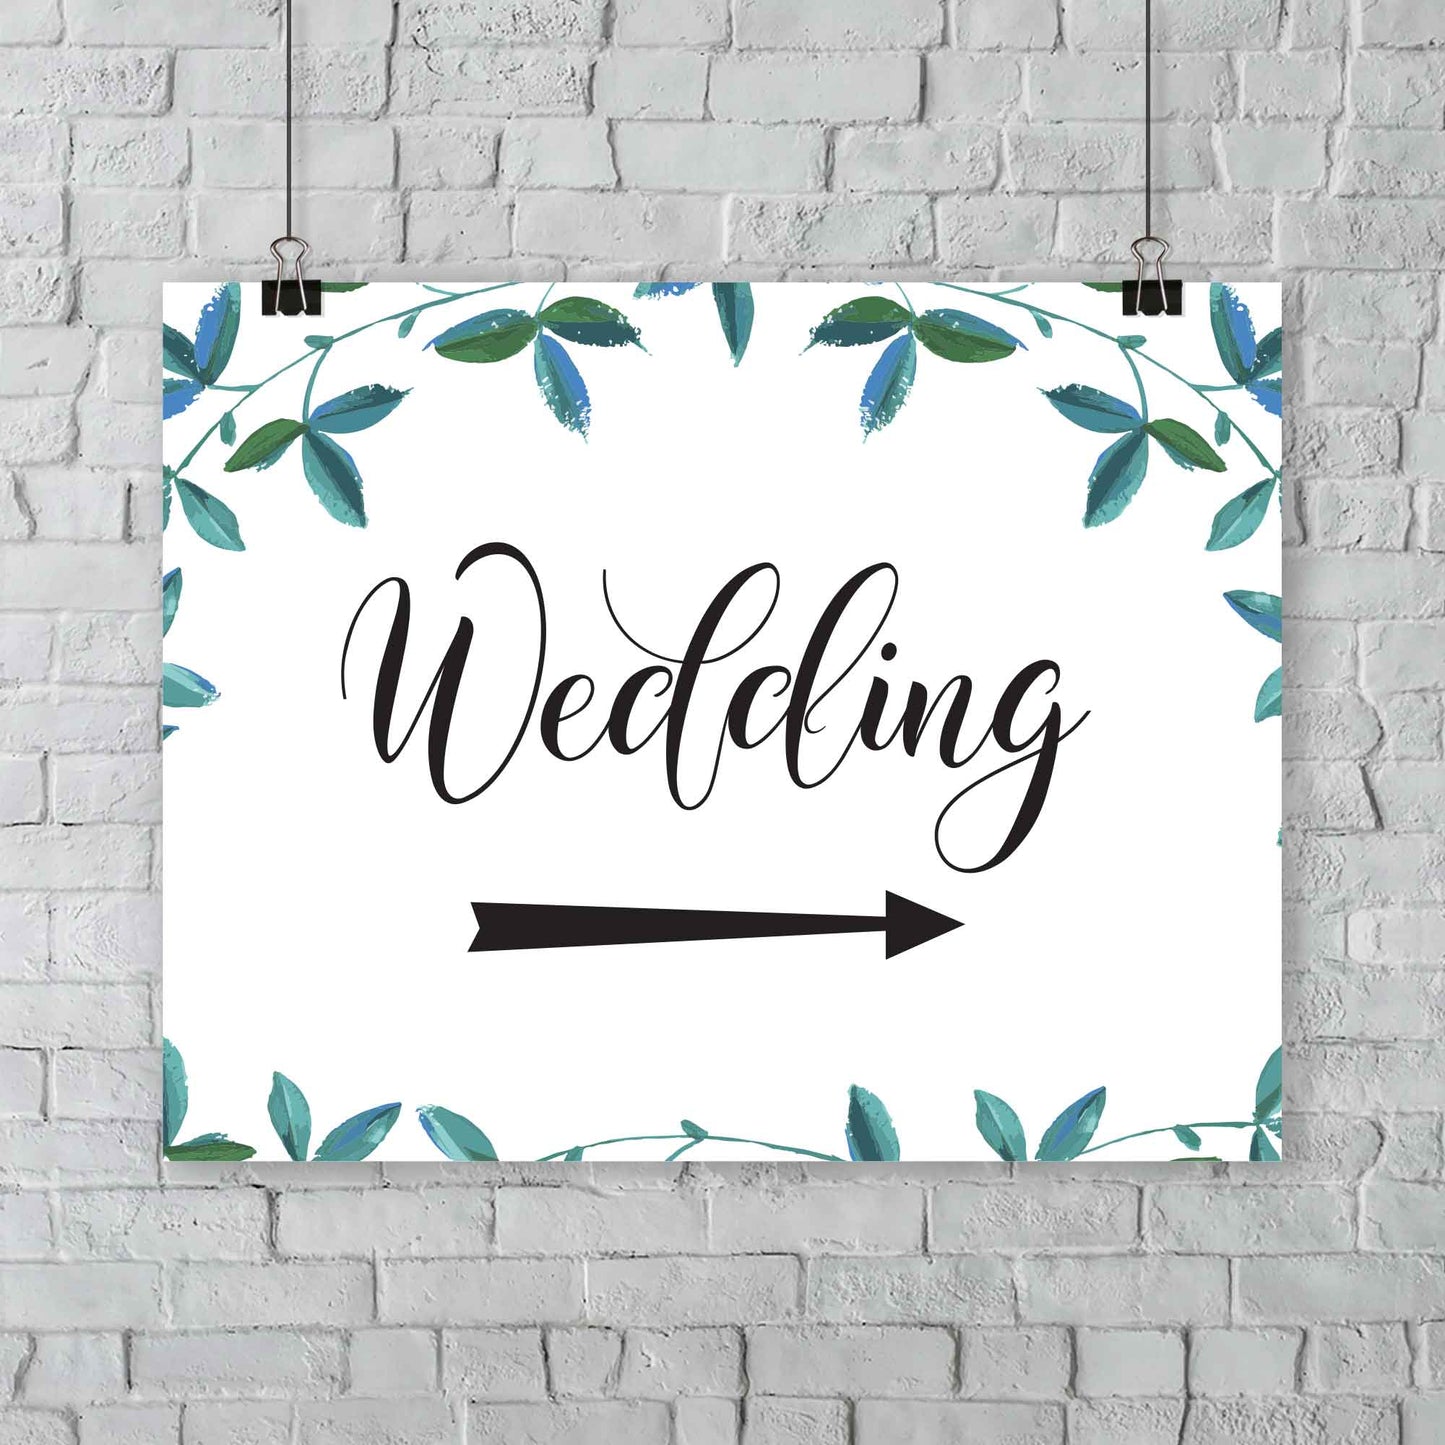 A2 green foliage wedding arrow sign hanging from a wall